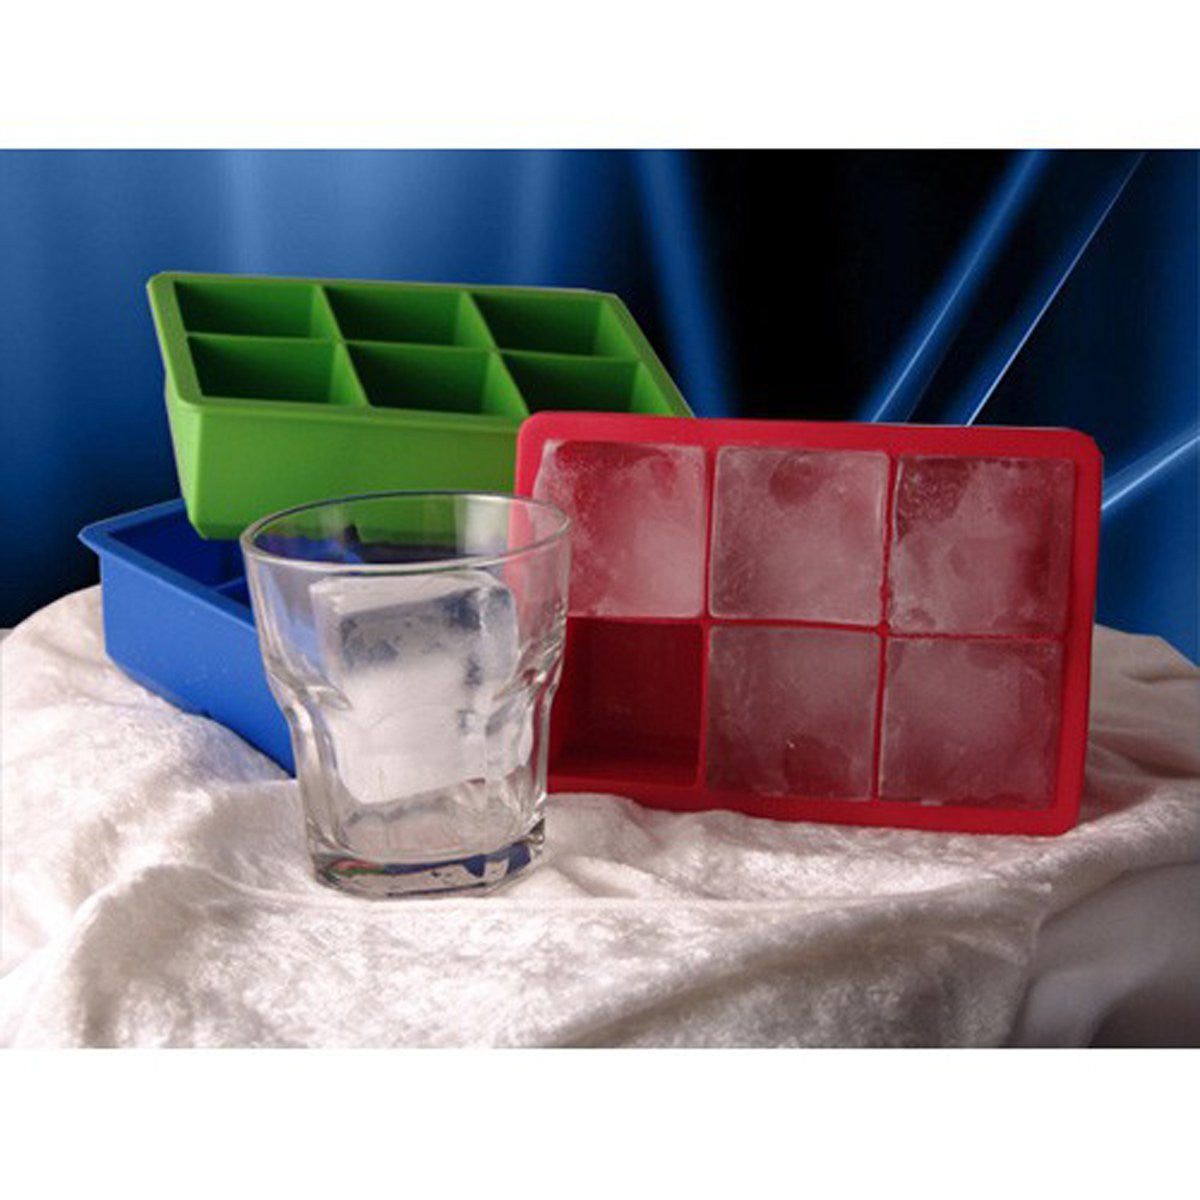 Royal Ford Push And Take Smart Ice Cube Tray